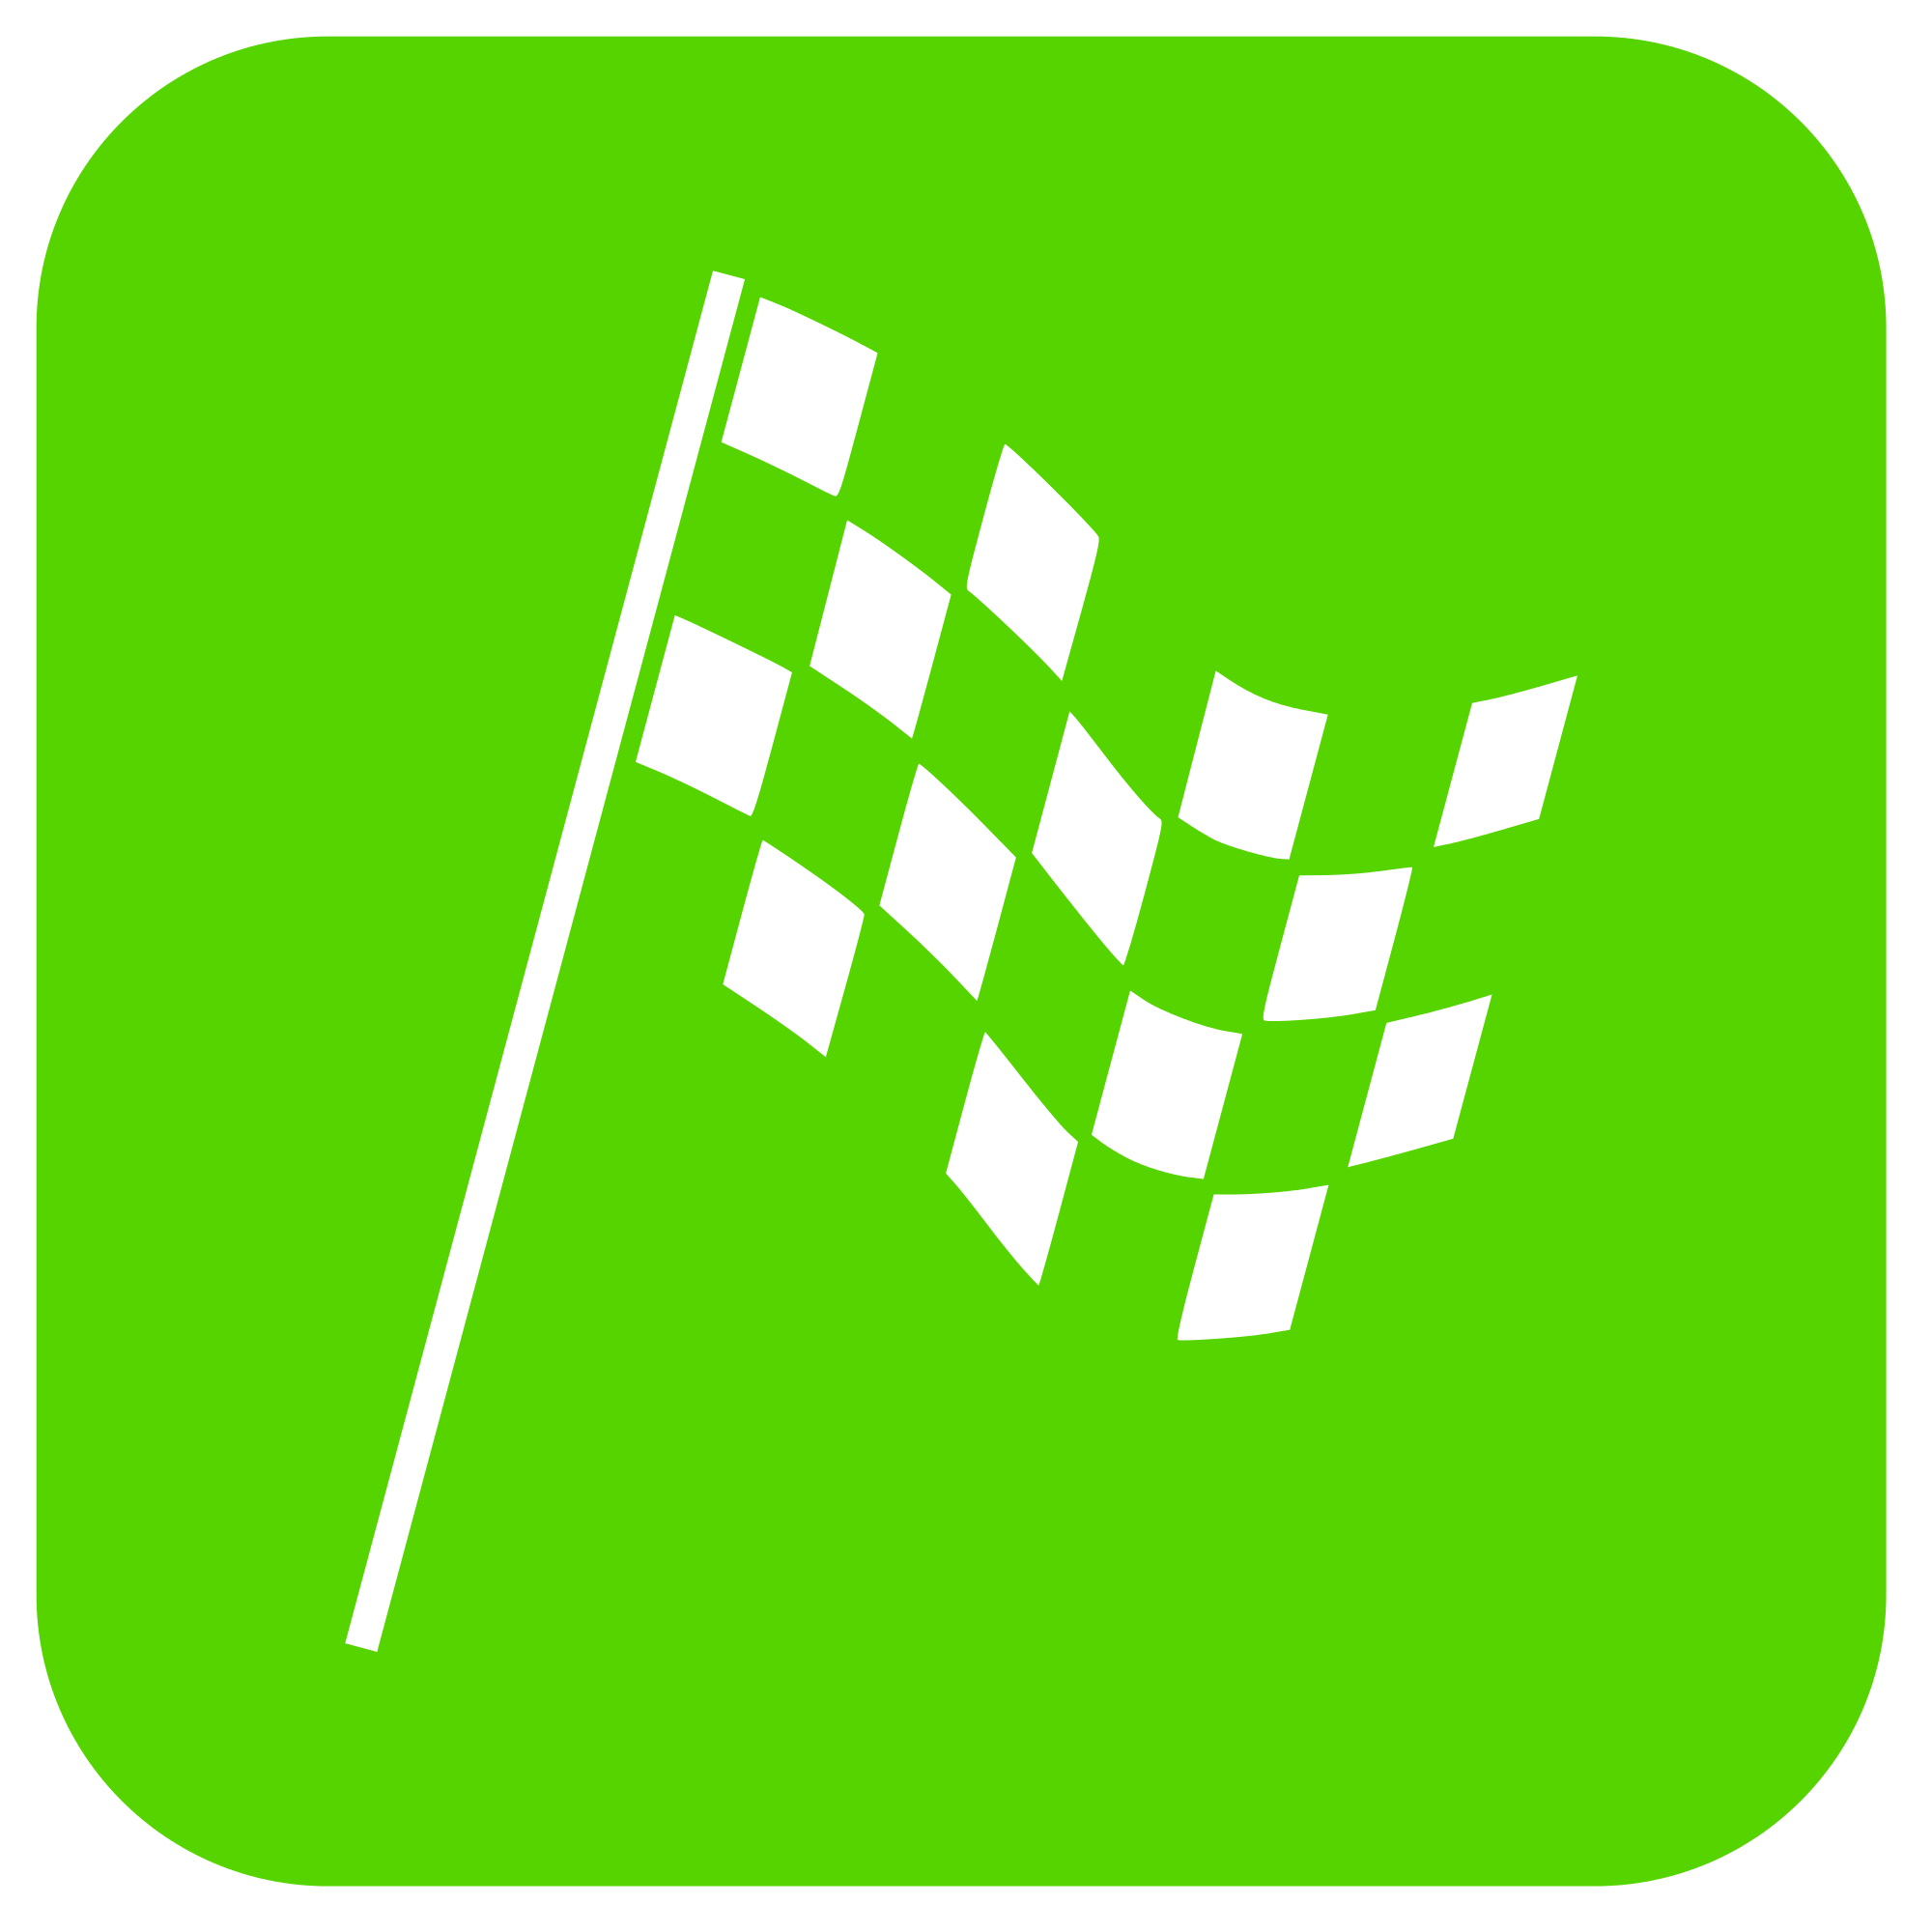 File:HEB project flow icon 04 checkered flag - Wikimedia Commons